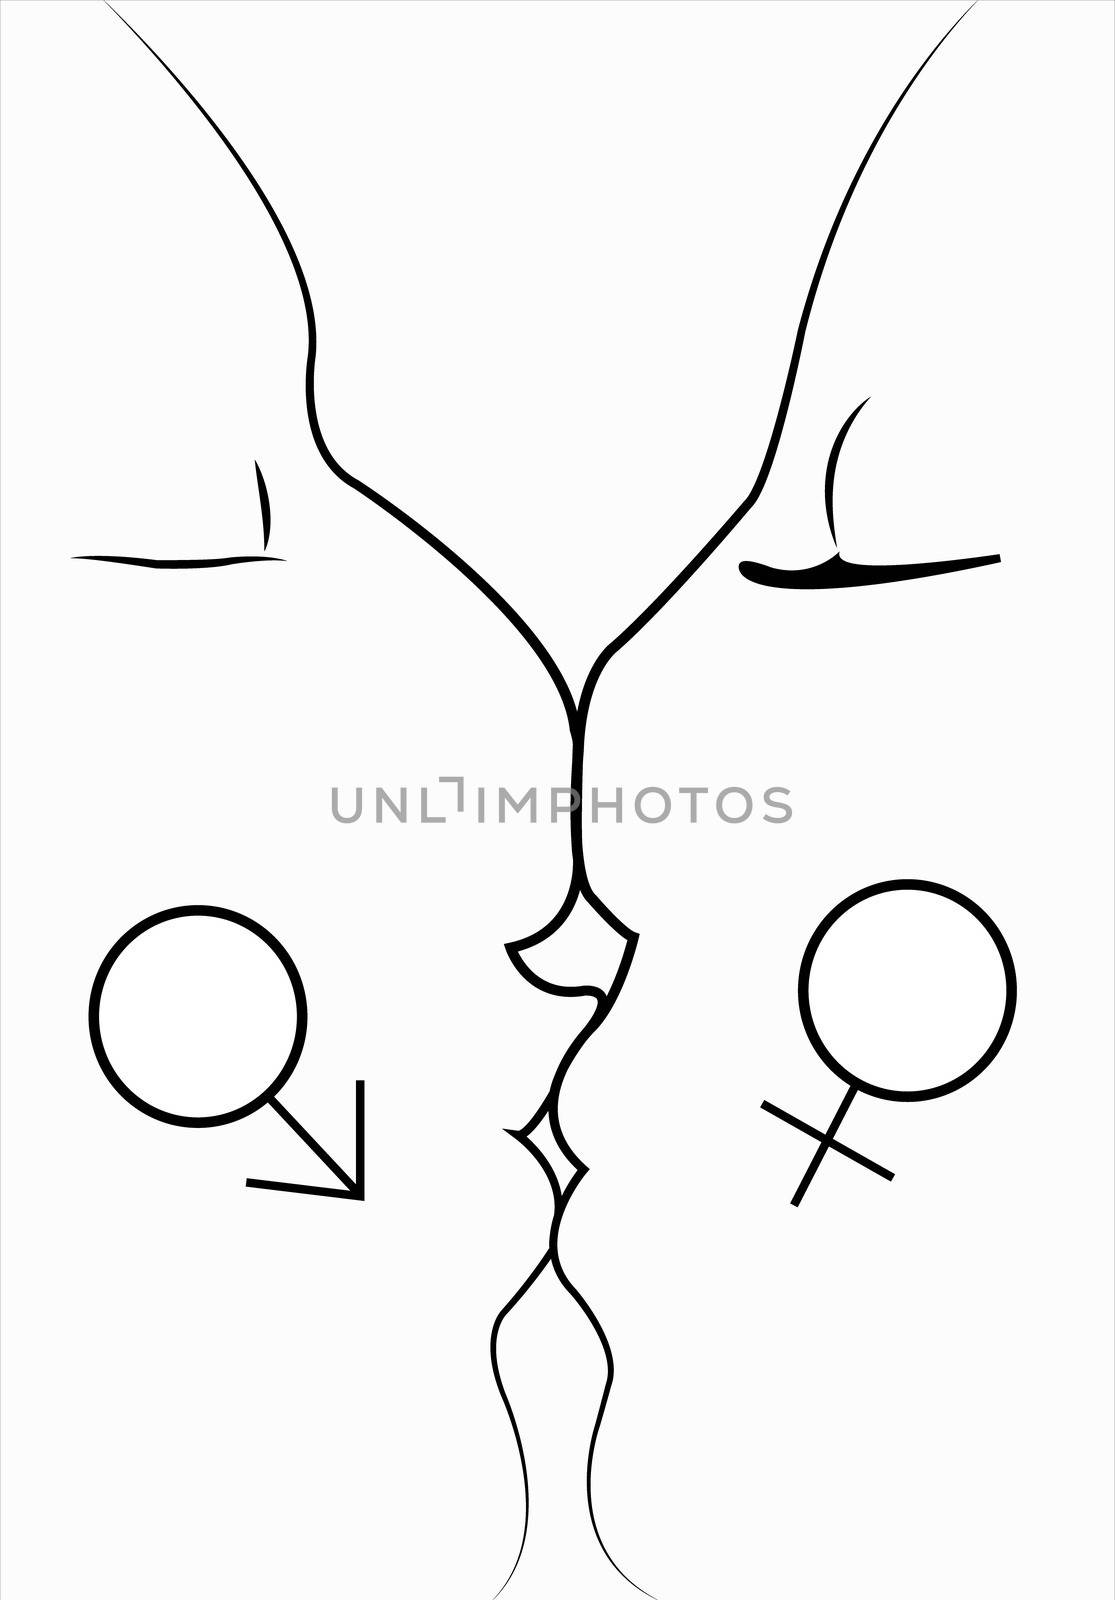 silhouette vector of a couple by Dr.G